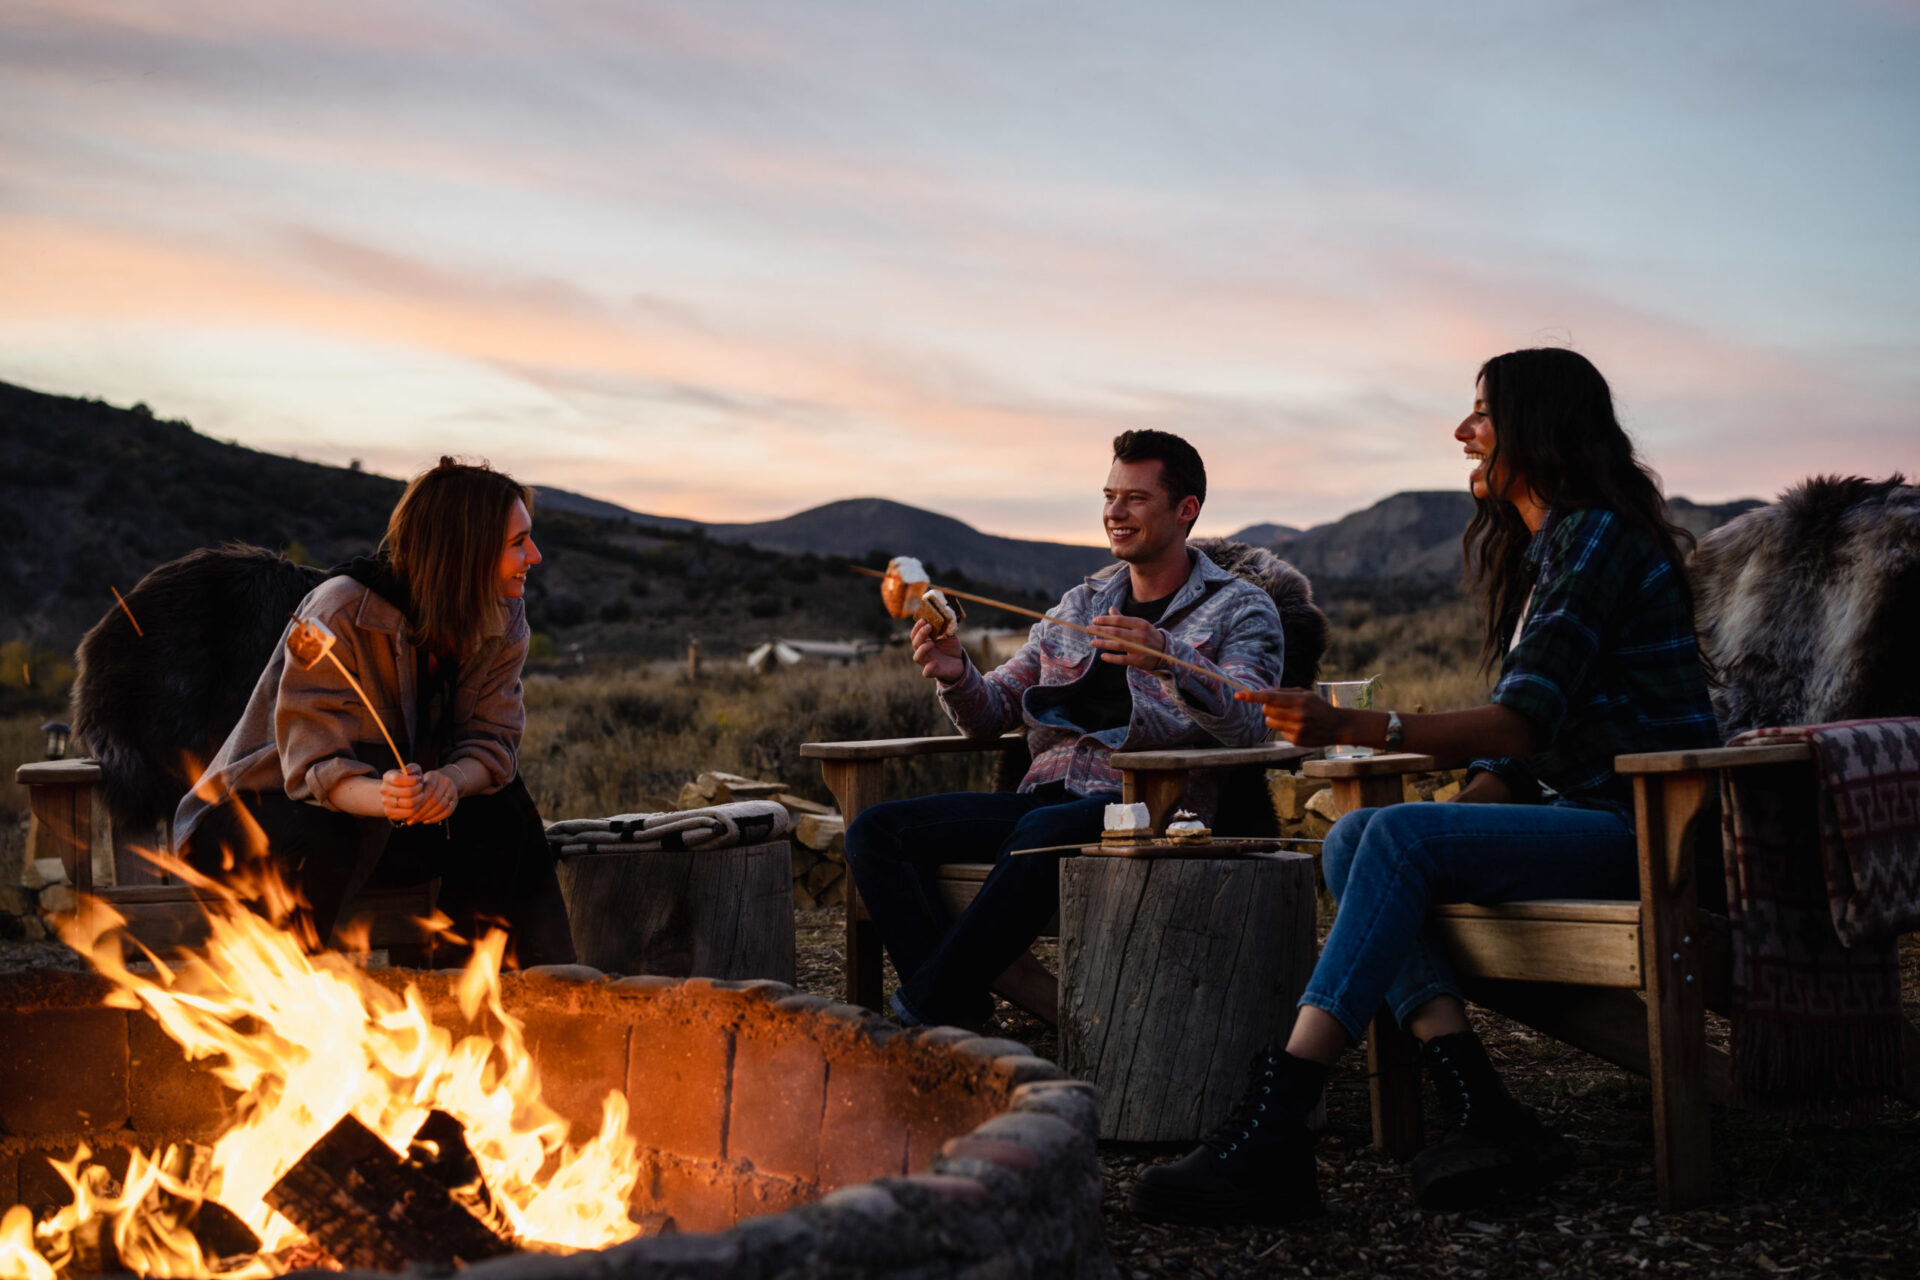 Two women and man sitting with campfire in the afternoon